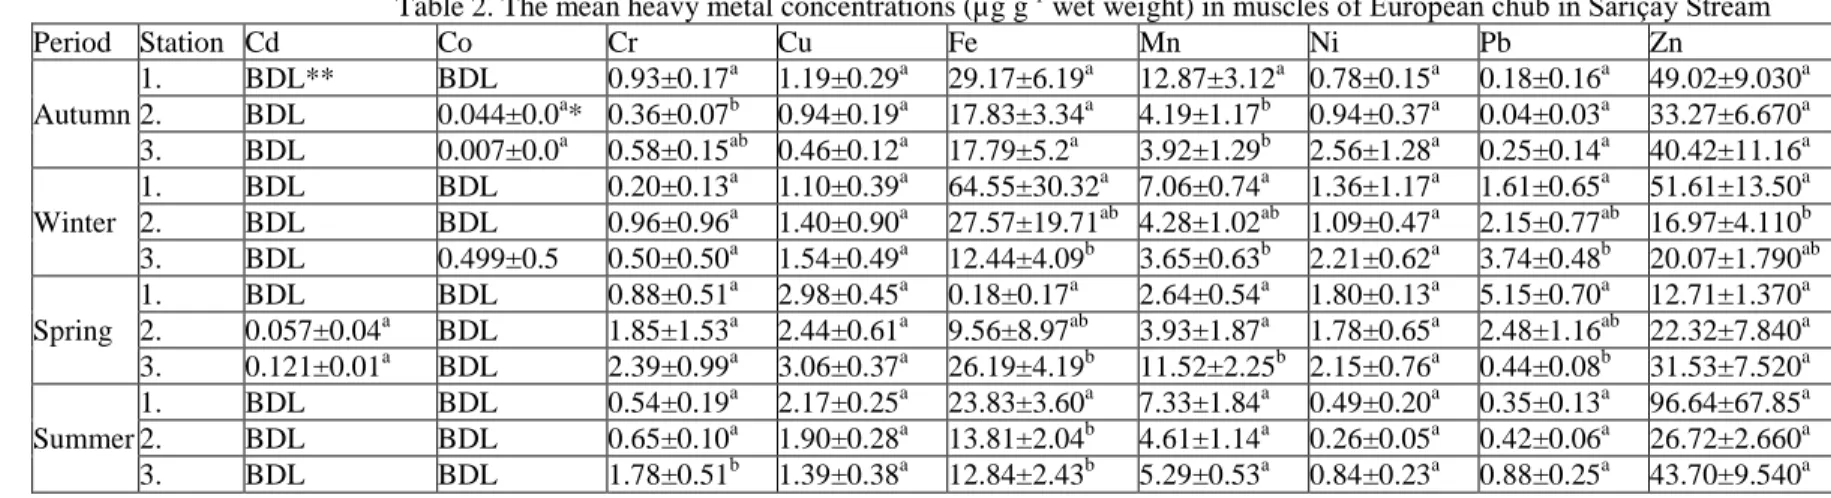 Table 2. The mean heavy metal concentrations (µg g -1  wet weight) in muscles  of European chub in Sarıçay Stream 